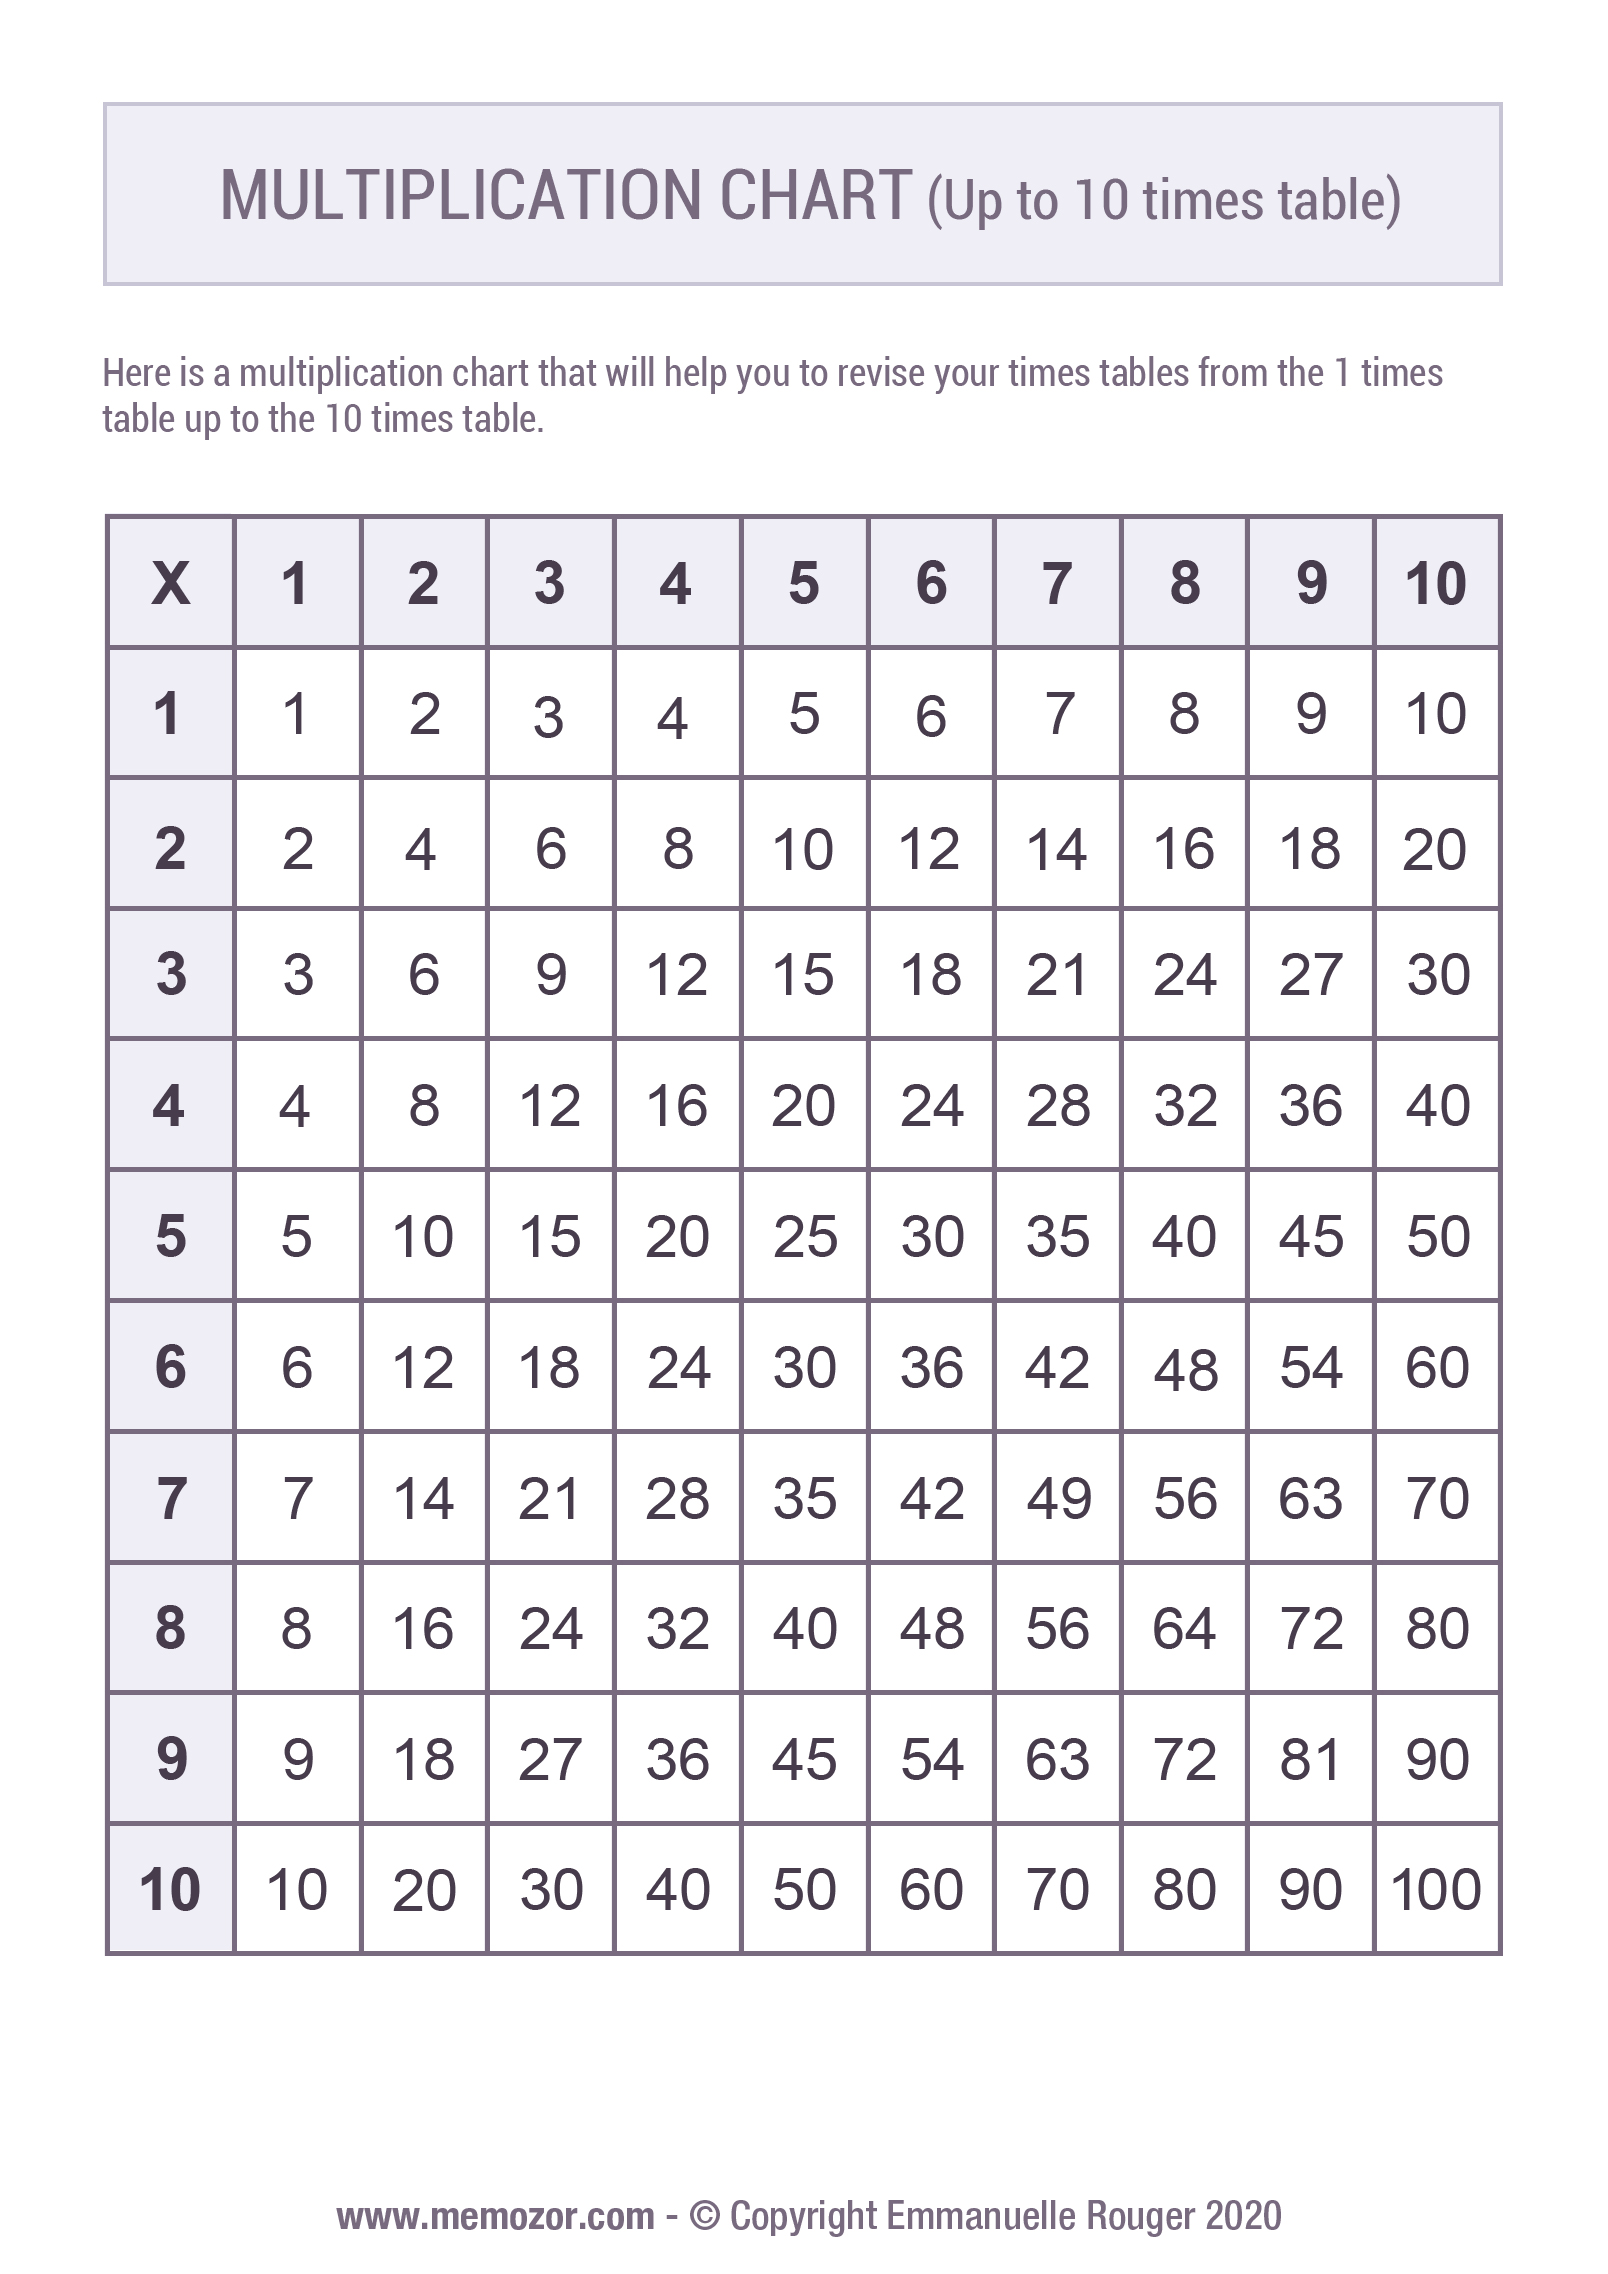 complete-multiplication-table-to-print-free-memozor